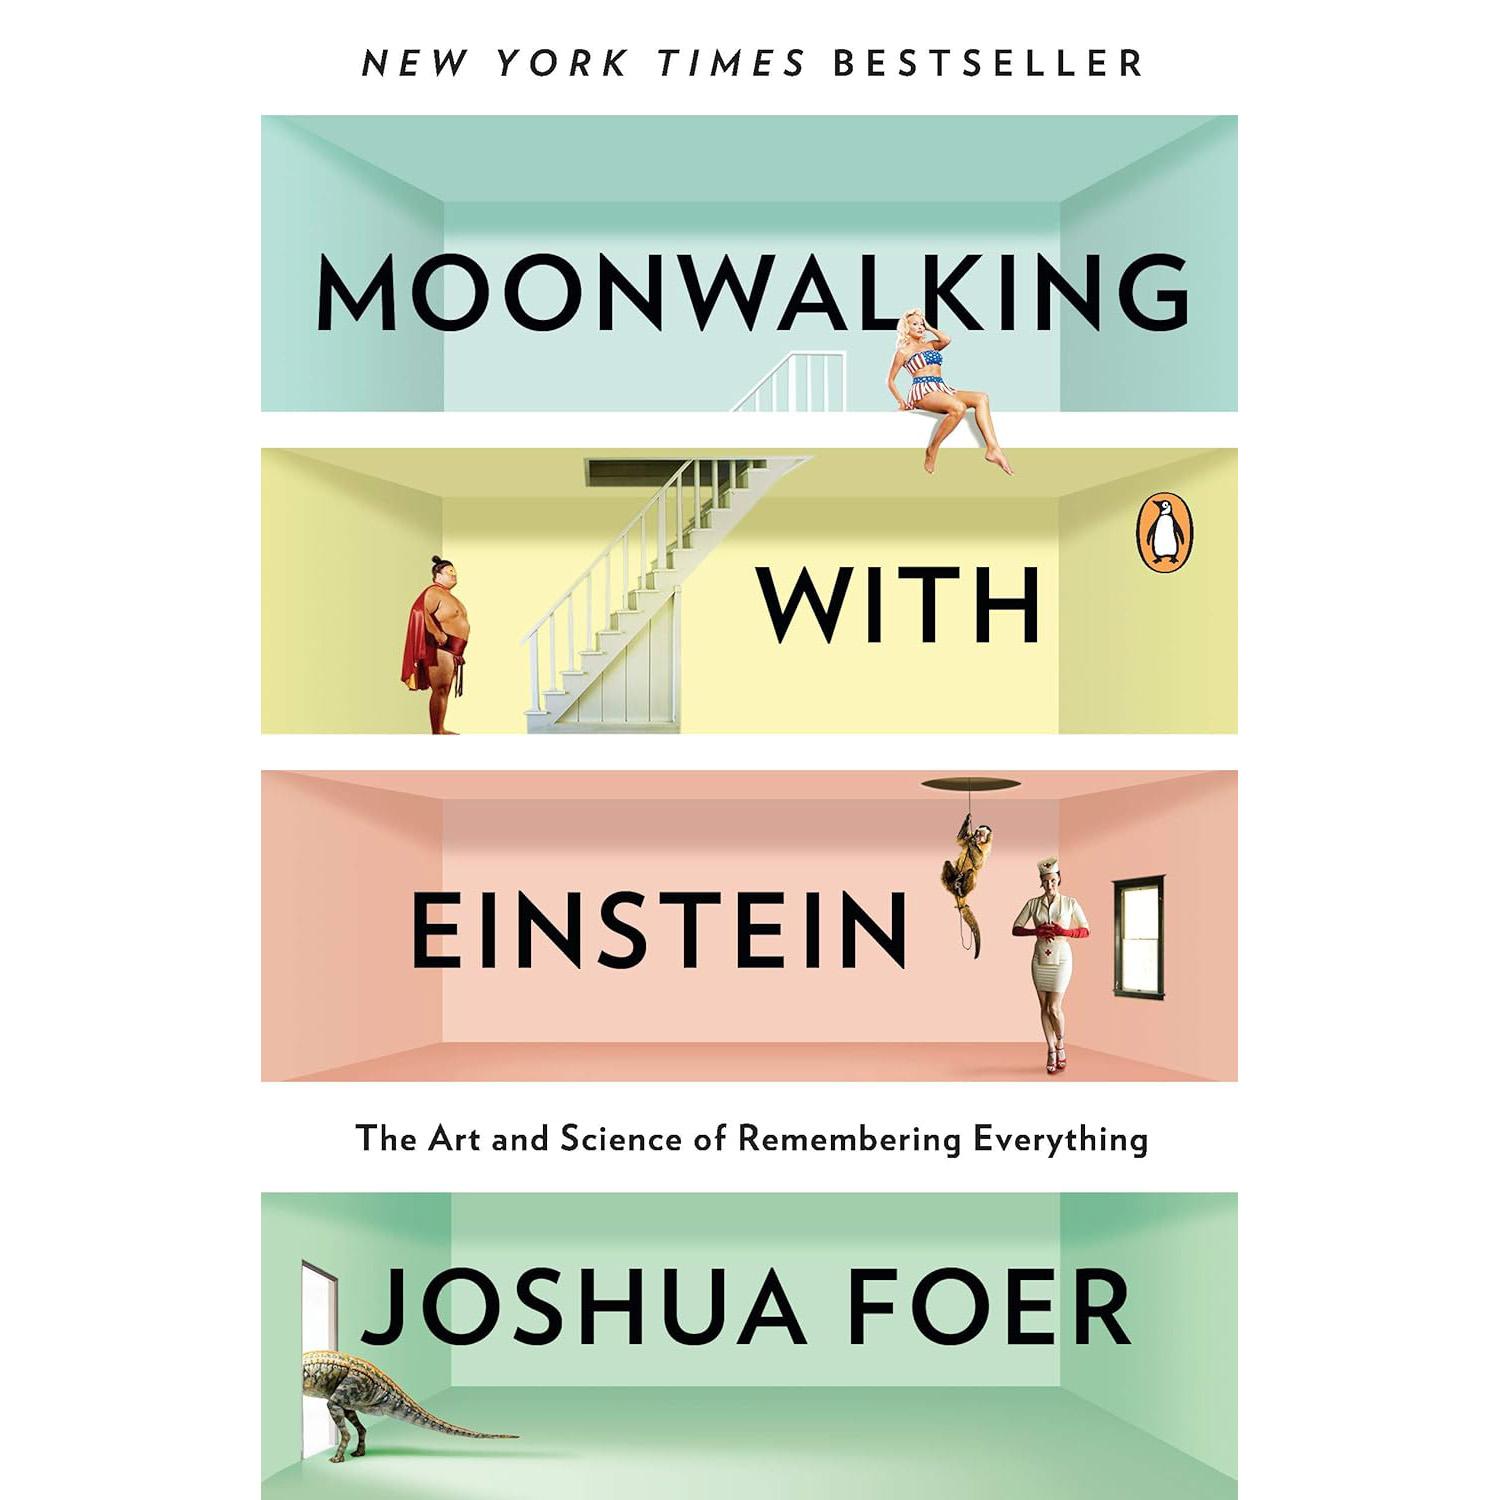 Moonwalking with Einstein The Art and Science of Remembering Everything eBook for $2